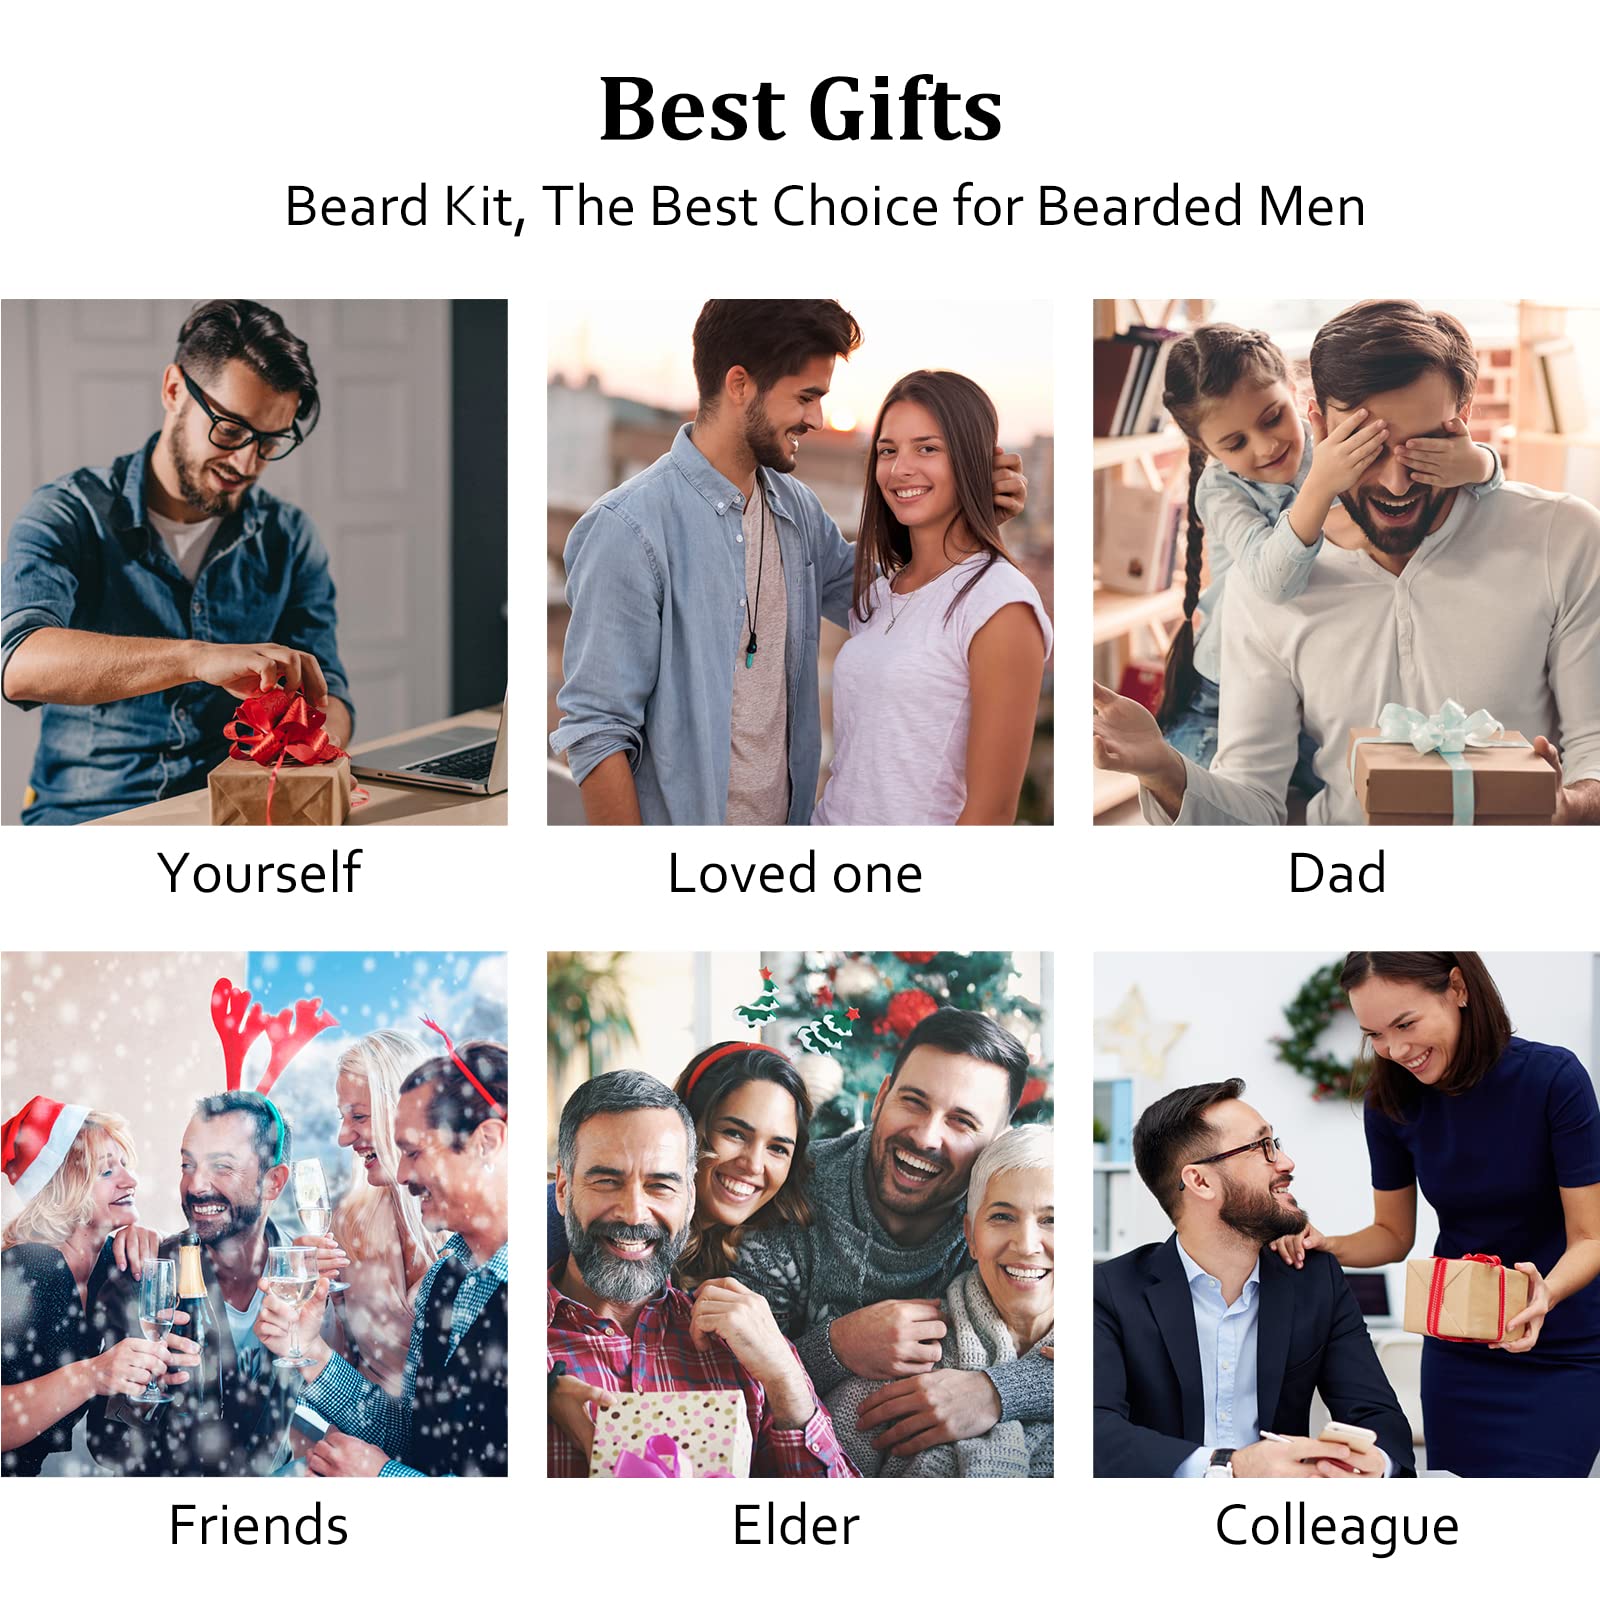 Birthday Gifts for Men - Beard Kit Gifts Set for Husband Dad Fiance Brother Grandpa Boyfriend, Gifts for Him, Anniversary, Graduation, Wedding, Christmas Gift Ideas for Men